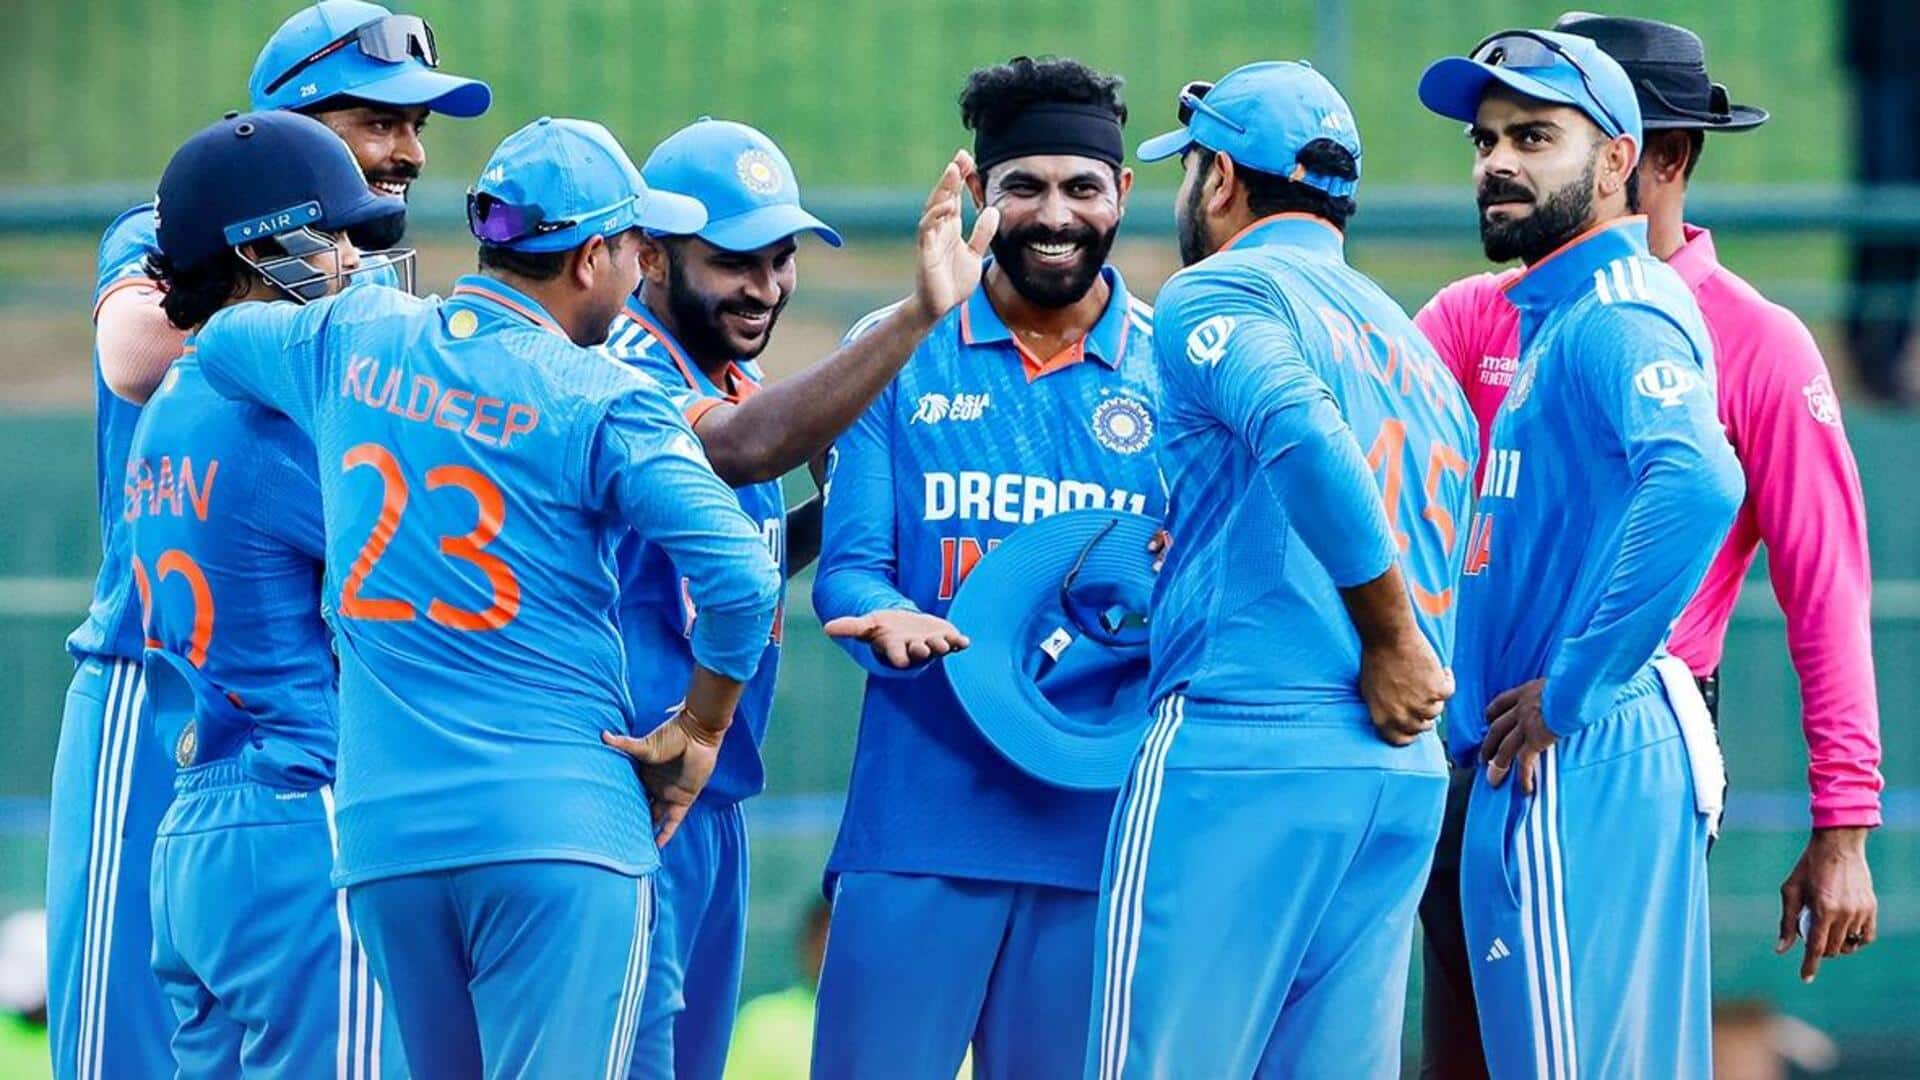 Ravindra Jadeja becomes India's joint-highest wicket-taker in ODI Asia Cup